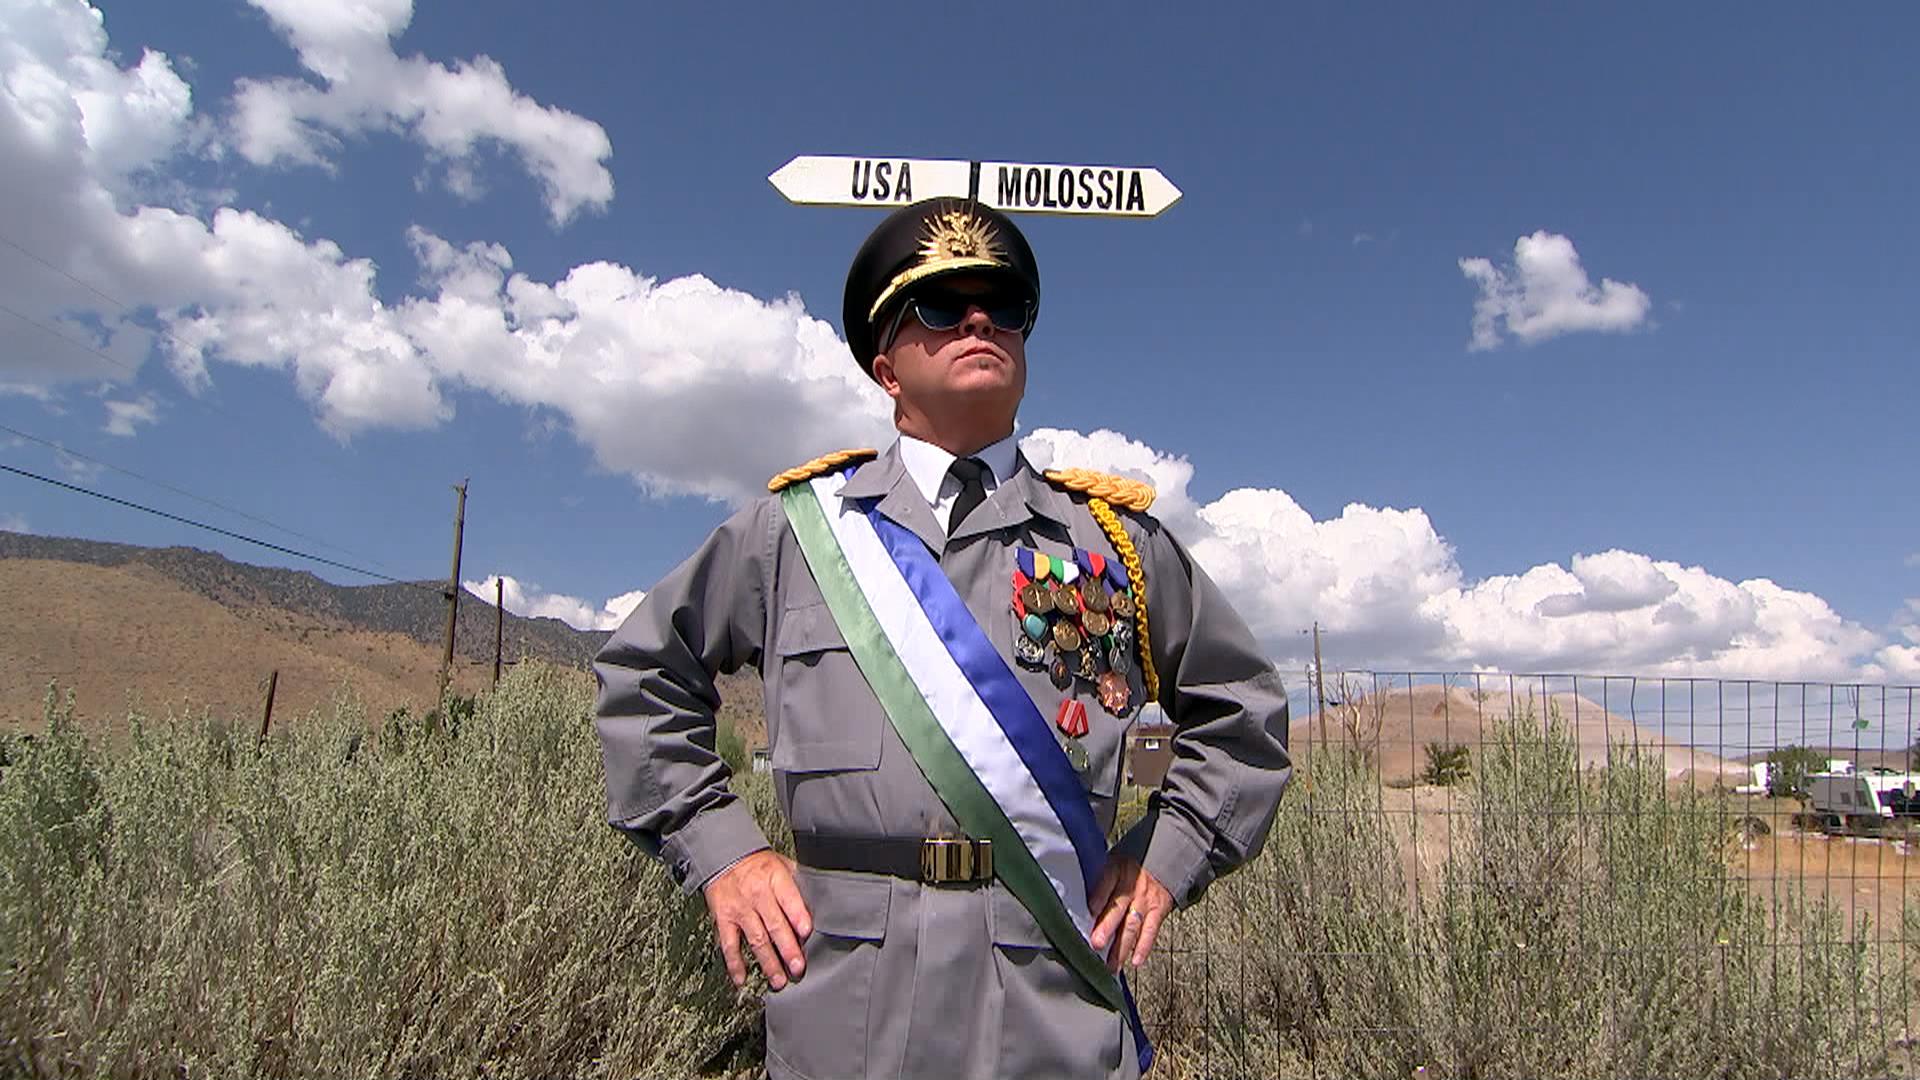 His Excellency President Kevin Baugh of Molossia